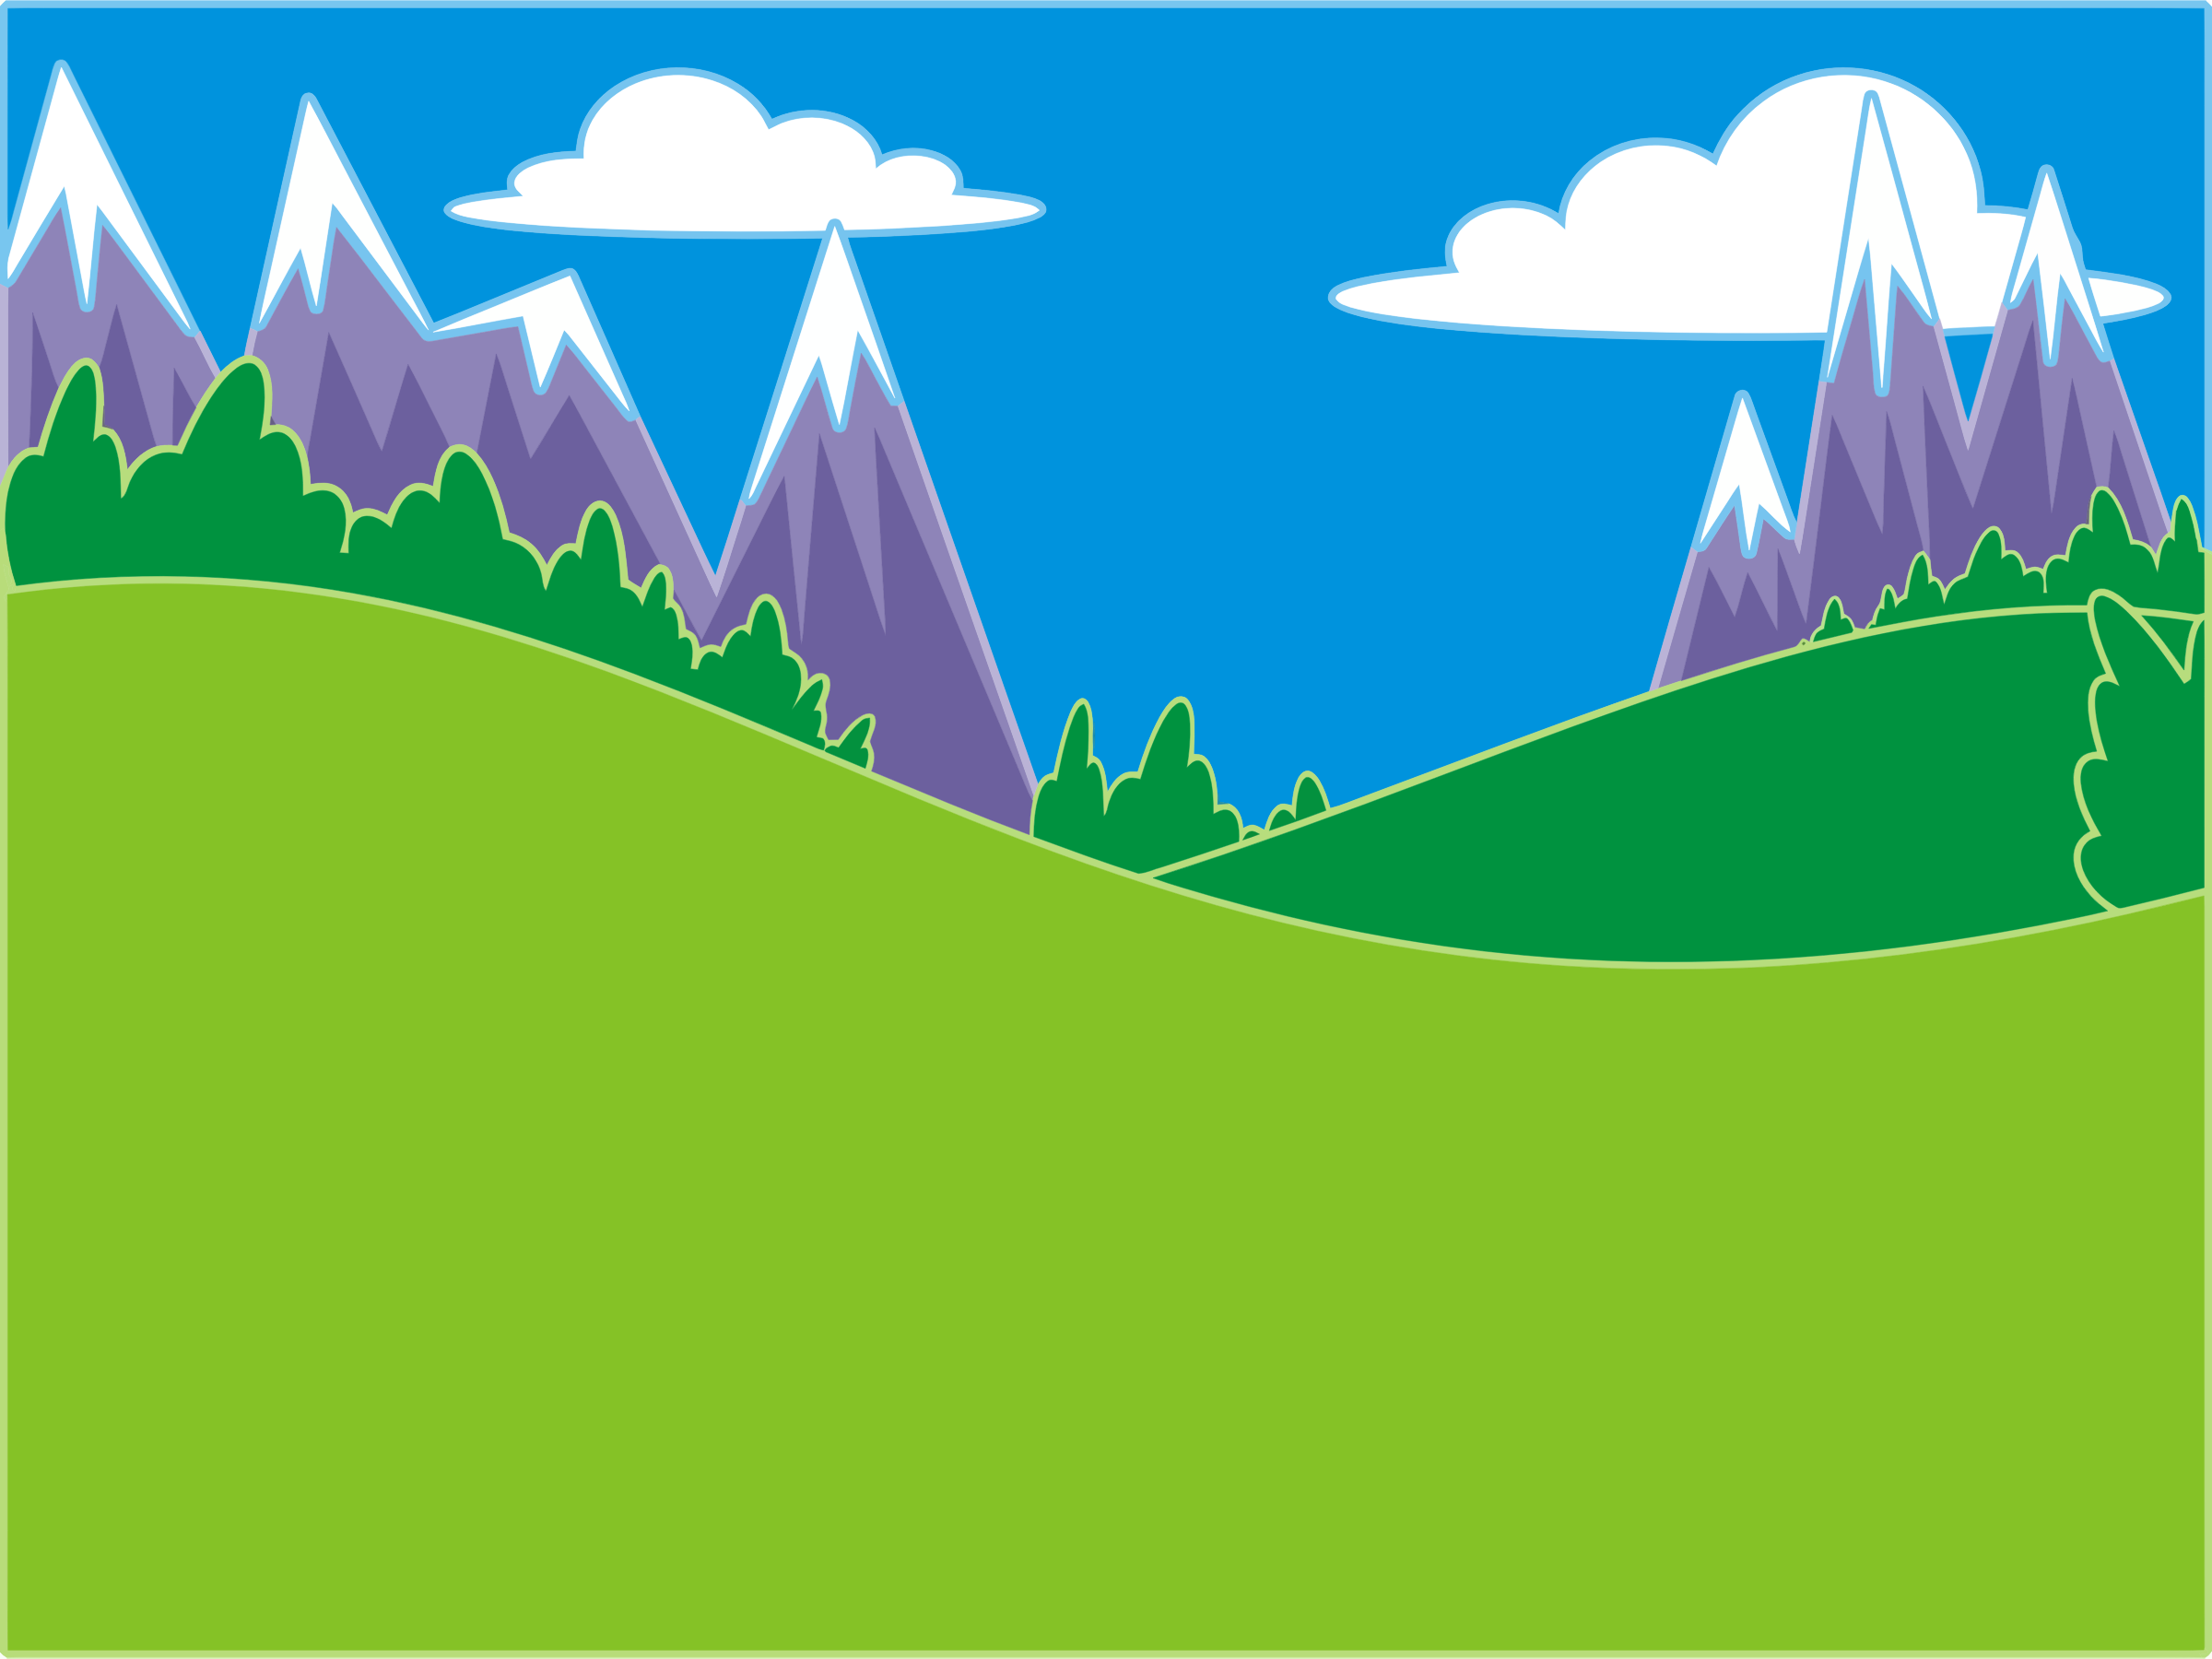 Clipart green hills and mountains landscape